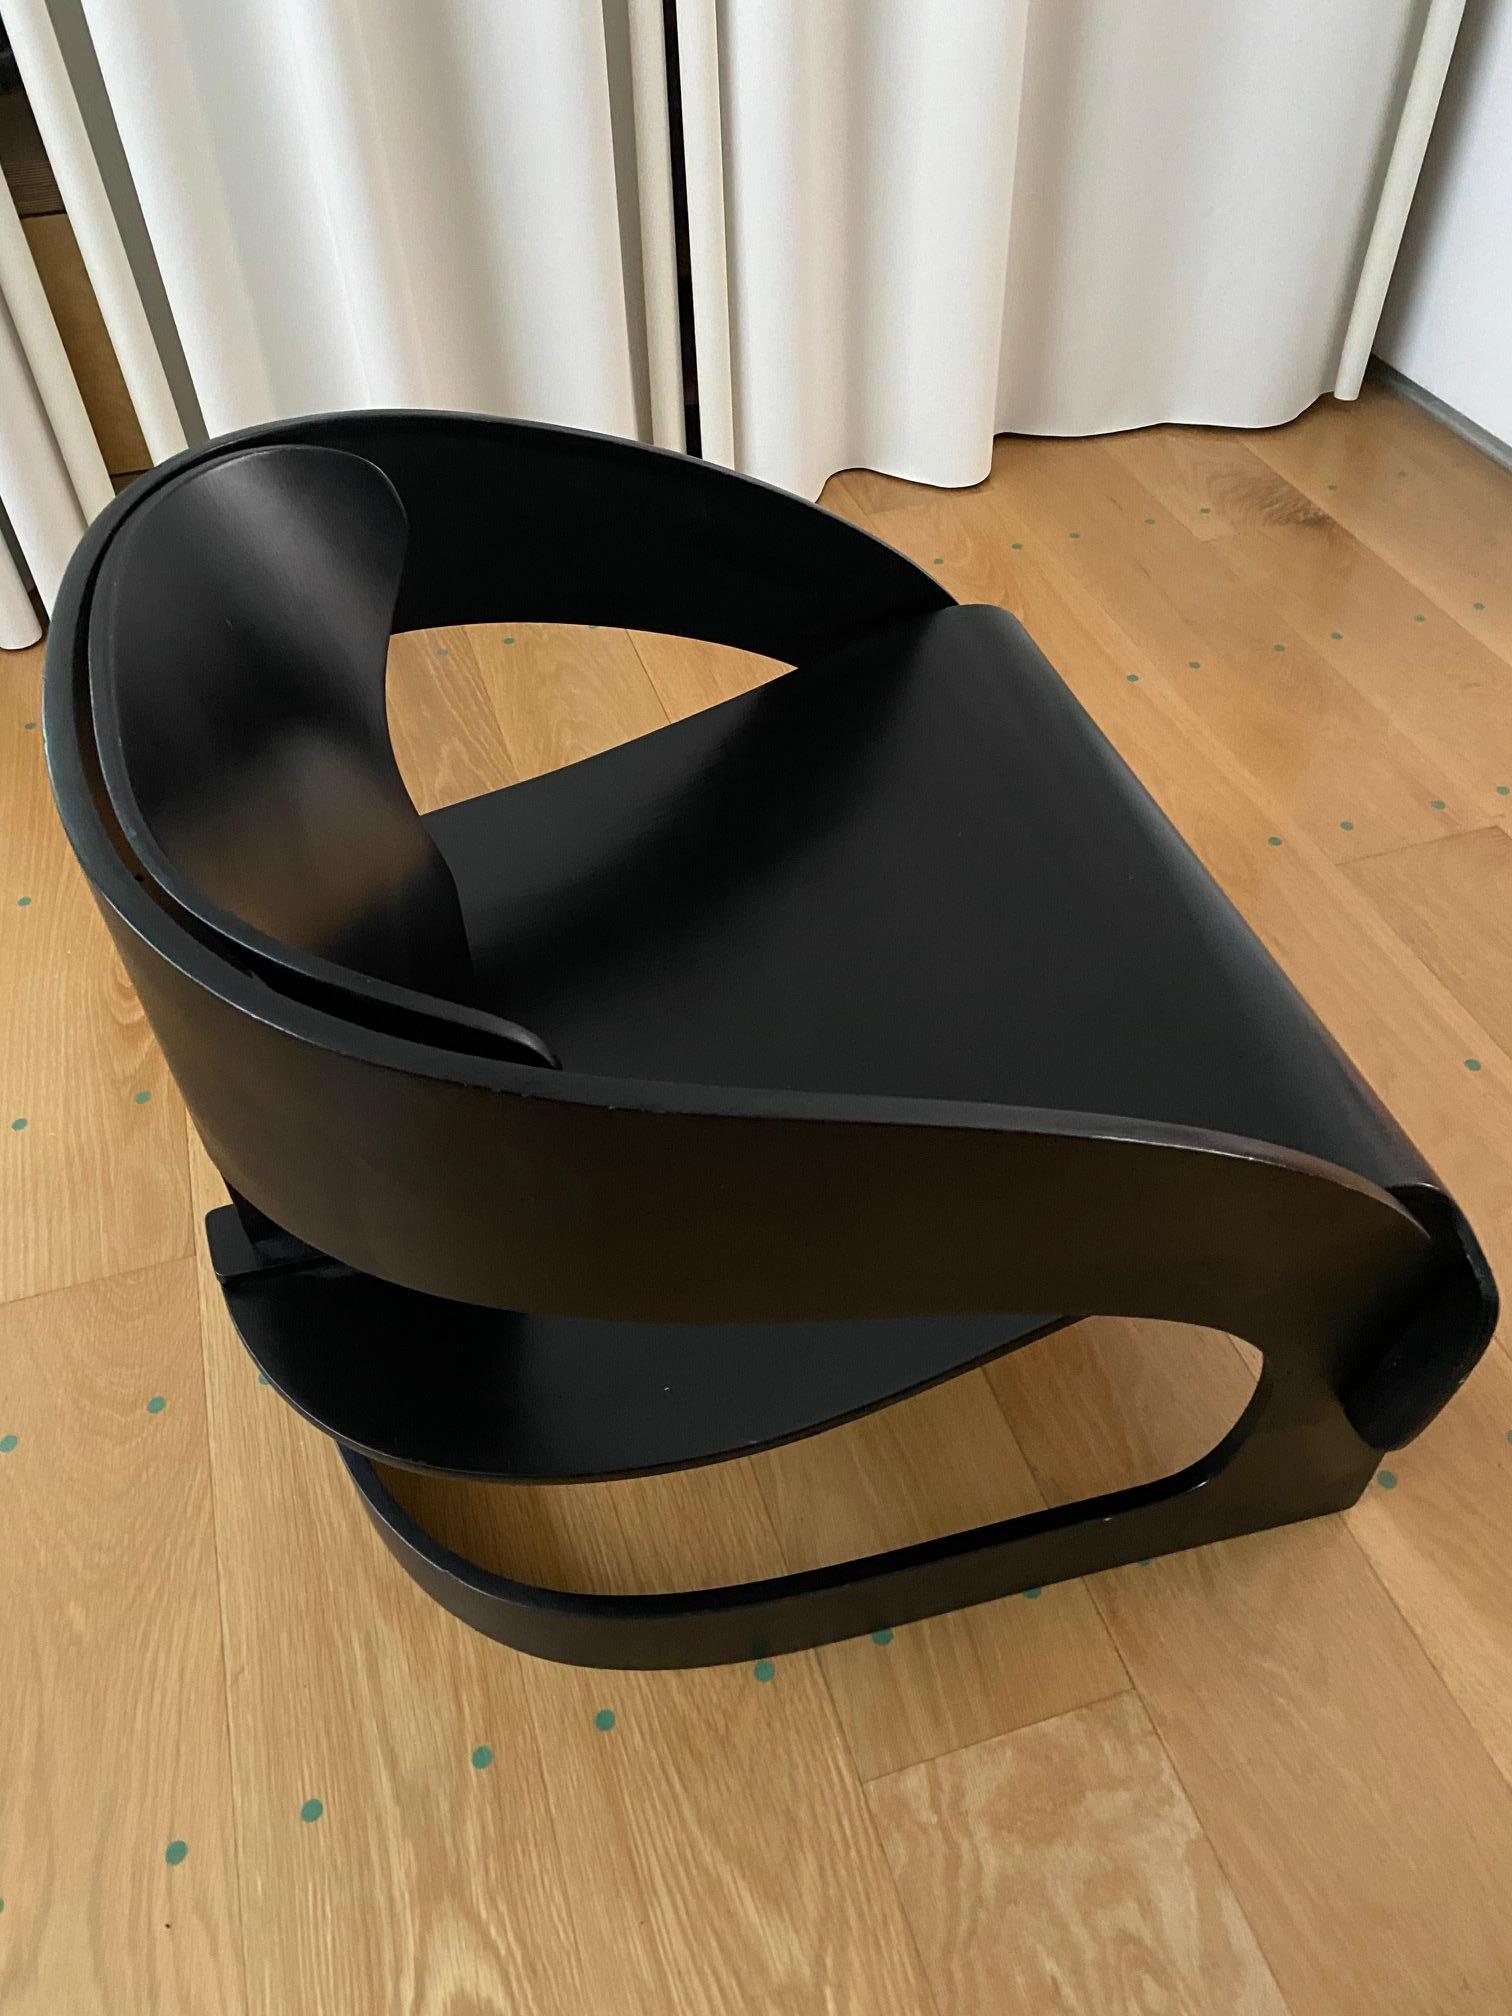 Joe Colombo Plywood Black 4801 Lounge Chair, Kartell, 1960s In Good Condition For Sale In London, GB